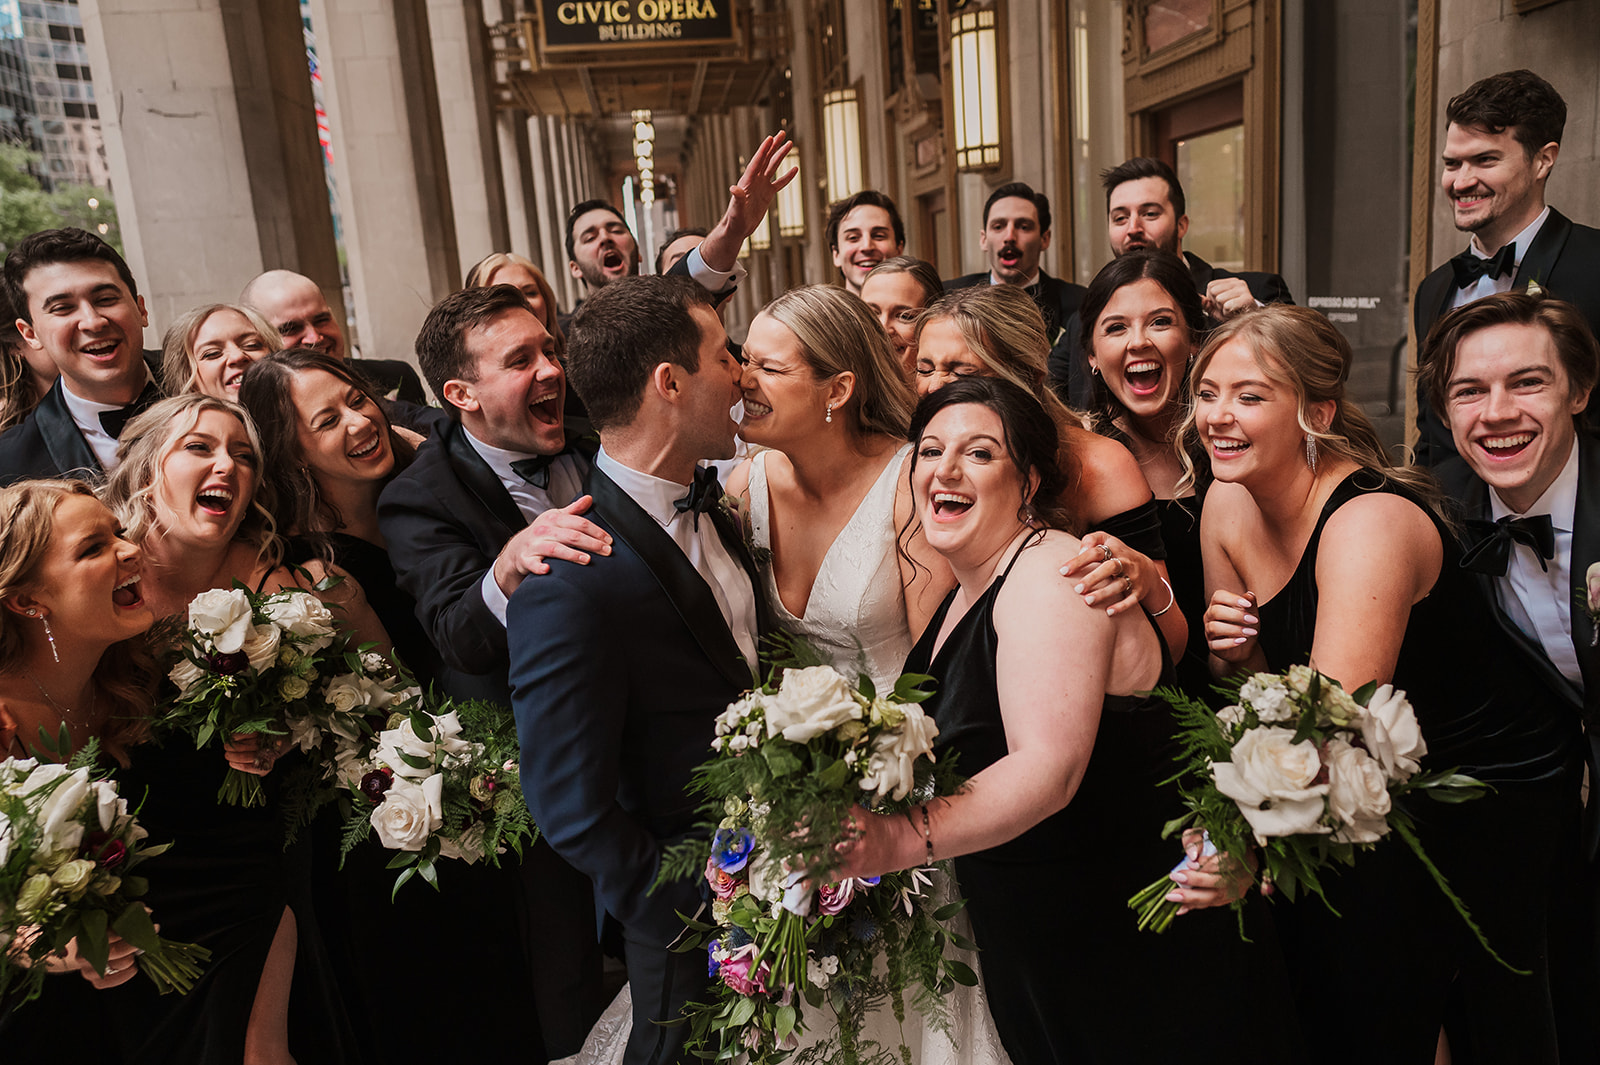 crazy wedding party photos at the Lyric Opera Chicago. black dresses and black suits